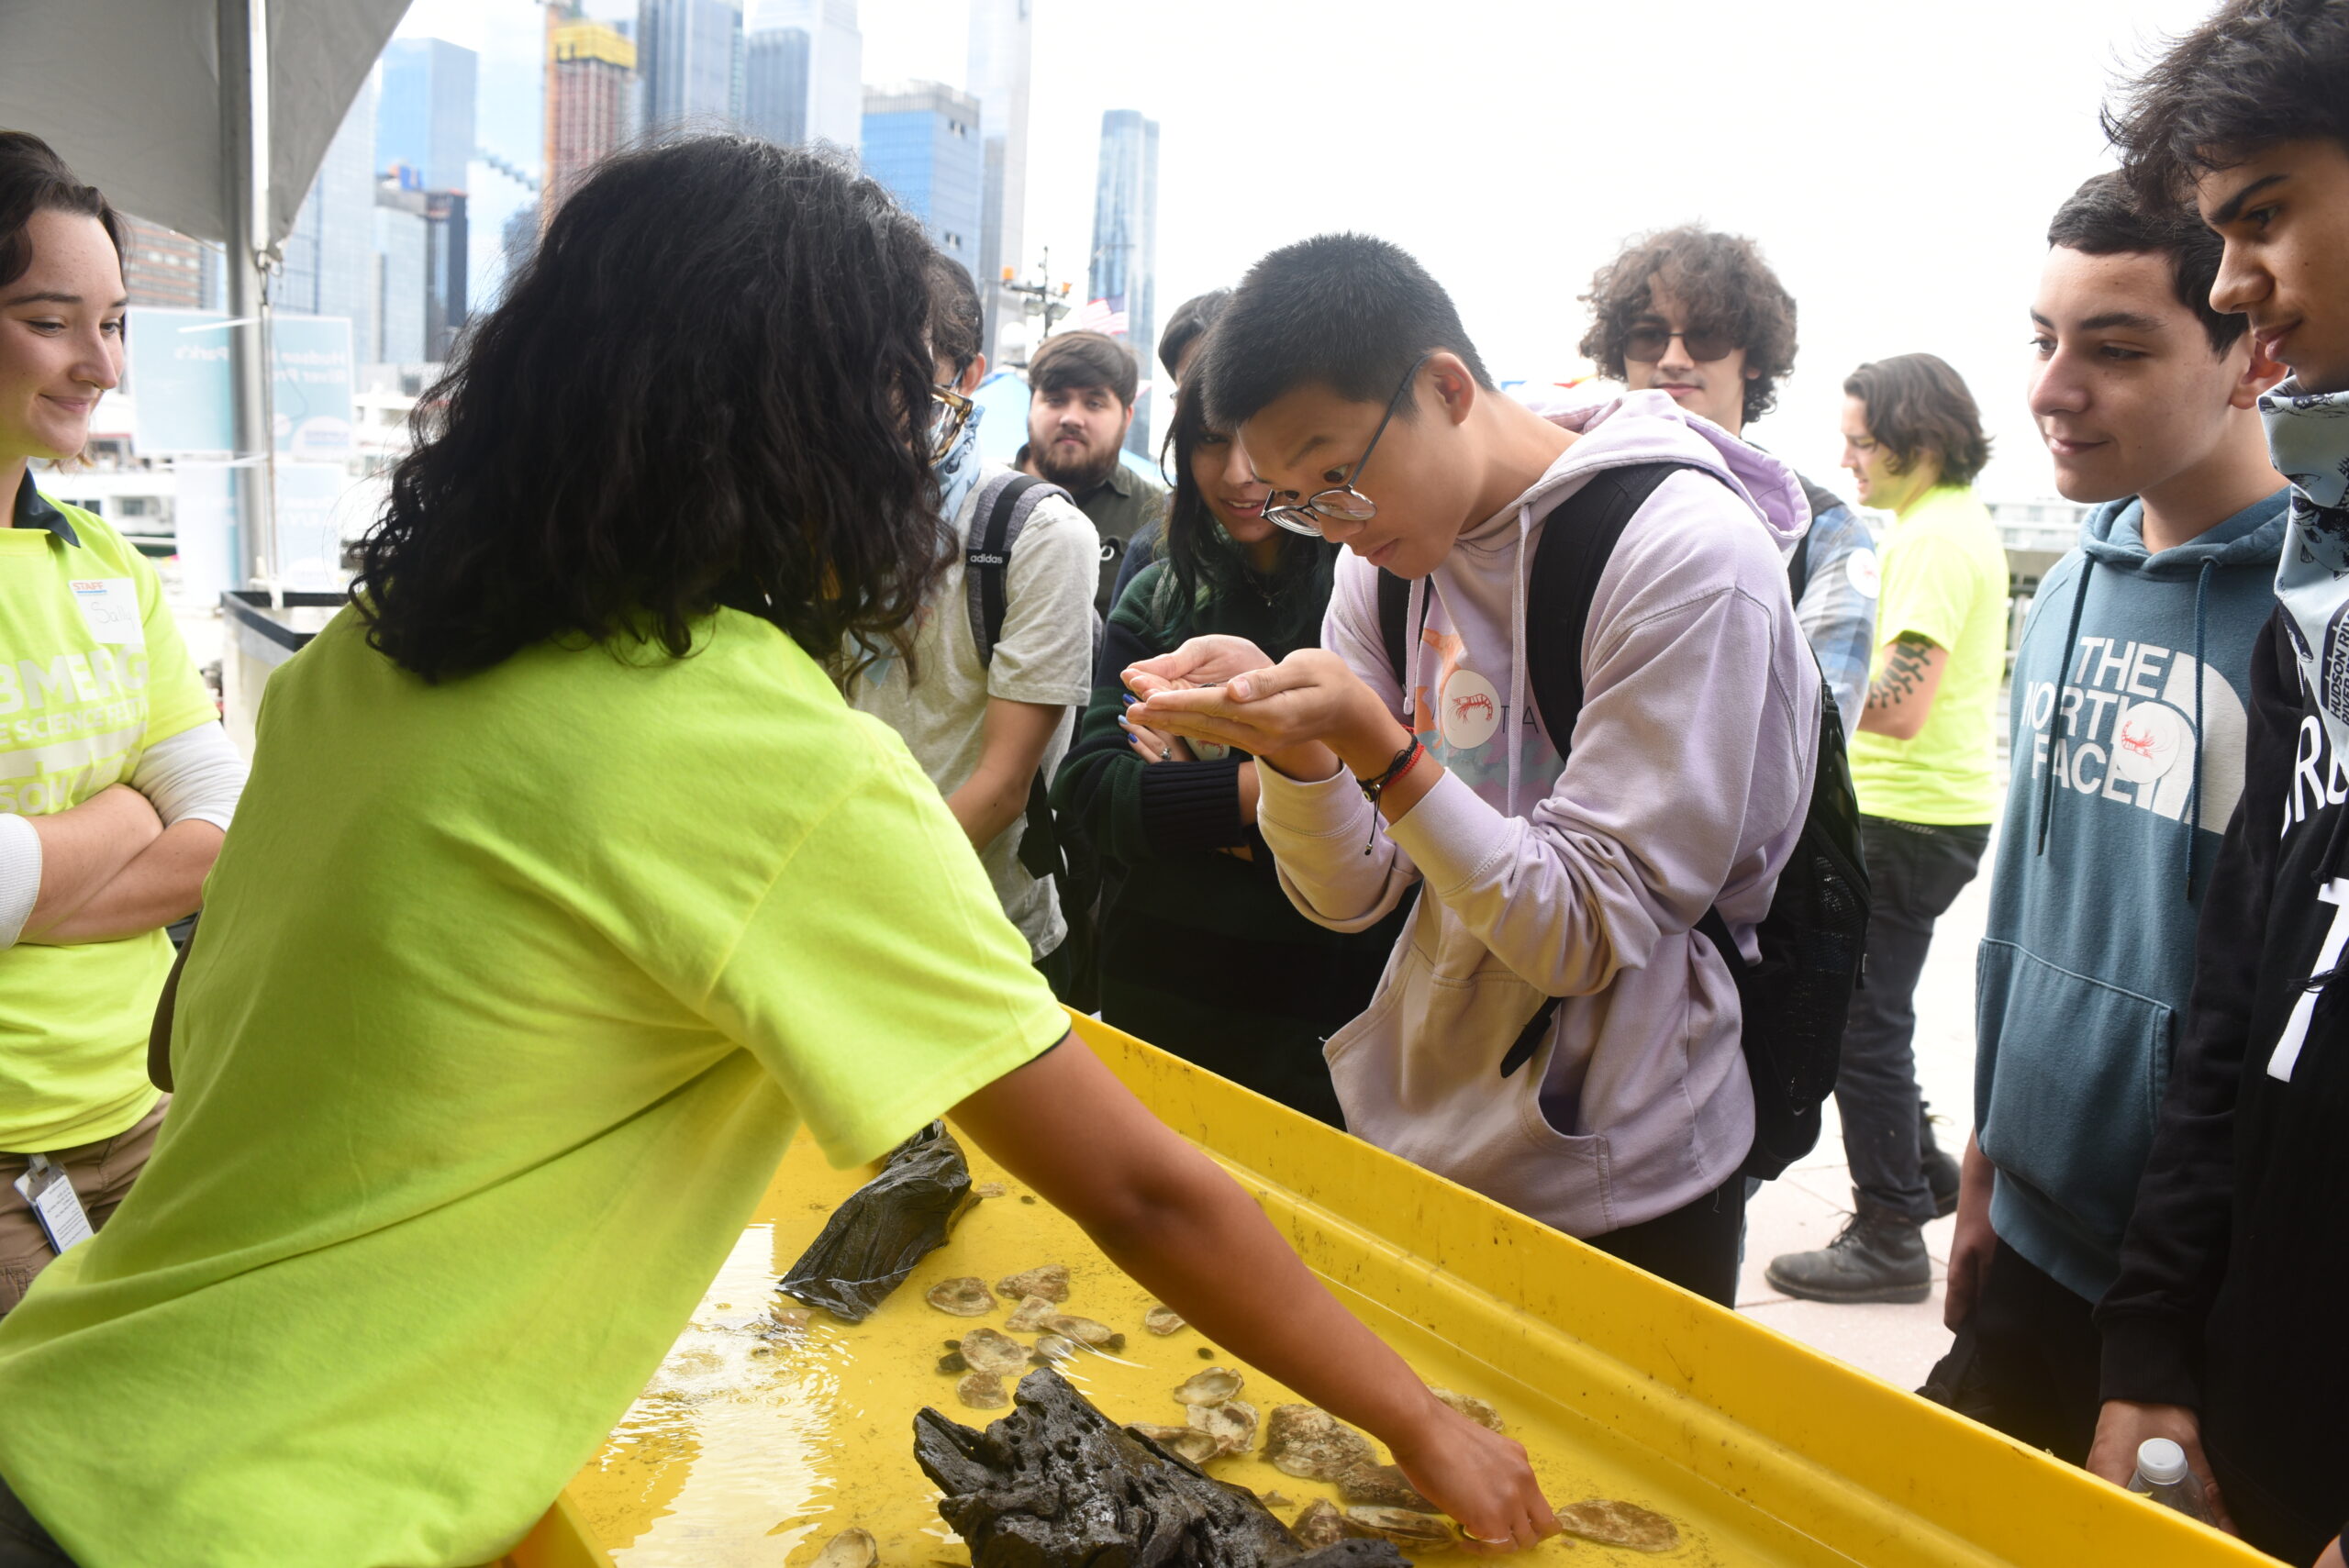 A high school student looking at a small Hudson River wildlife creature held in its hands